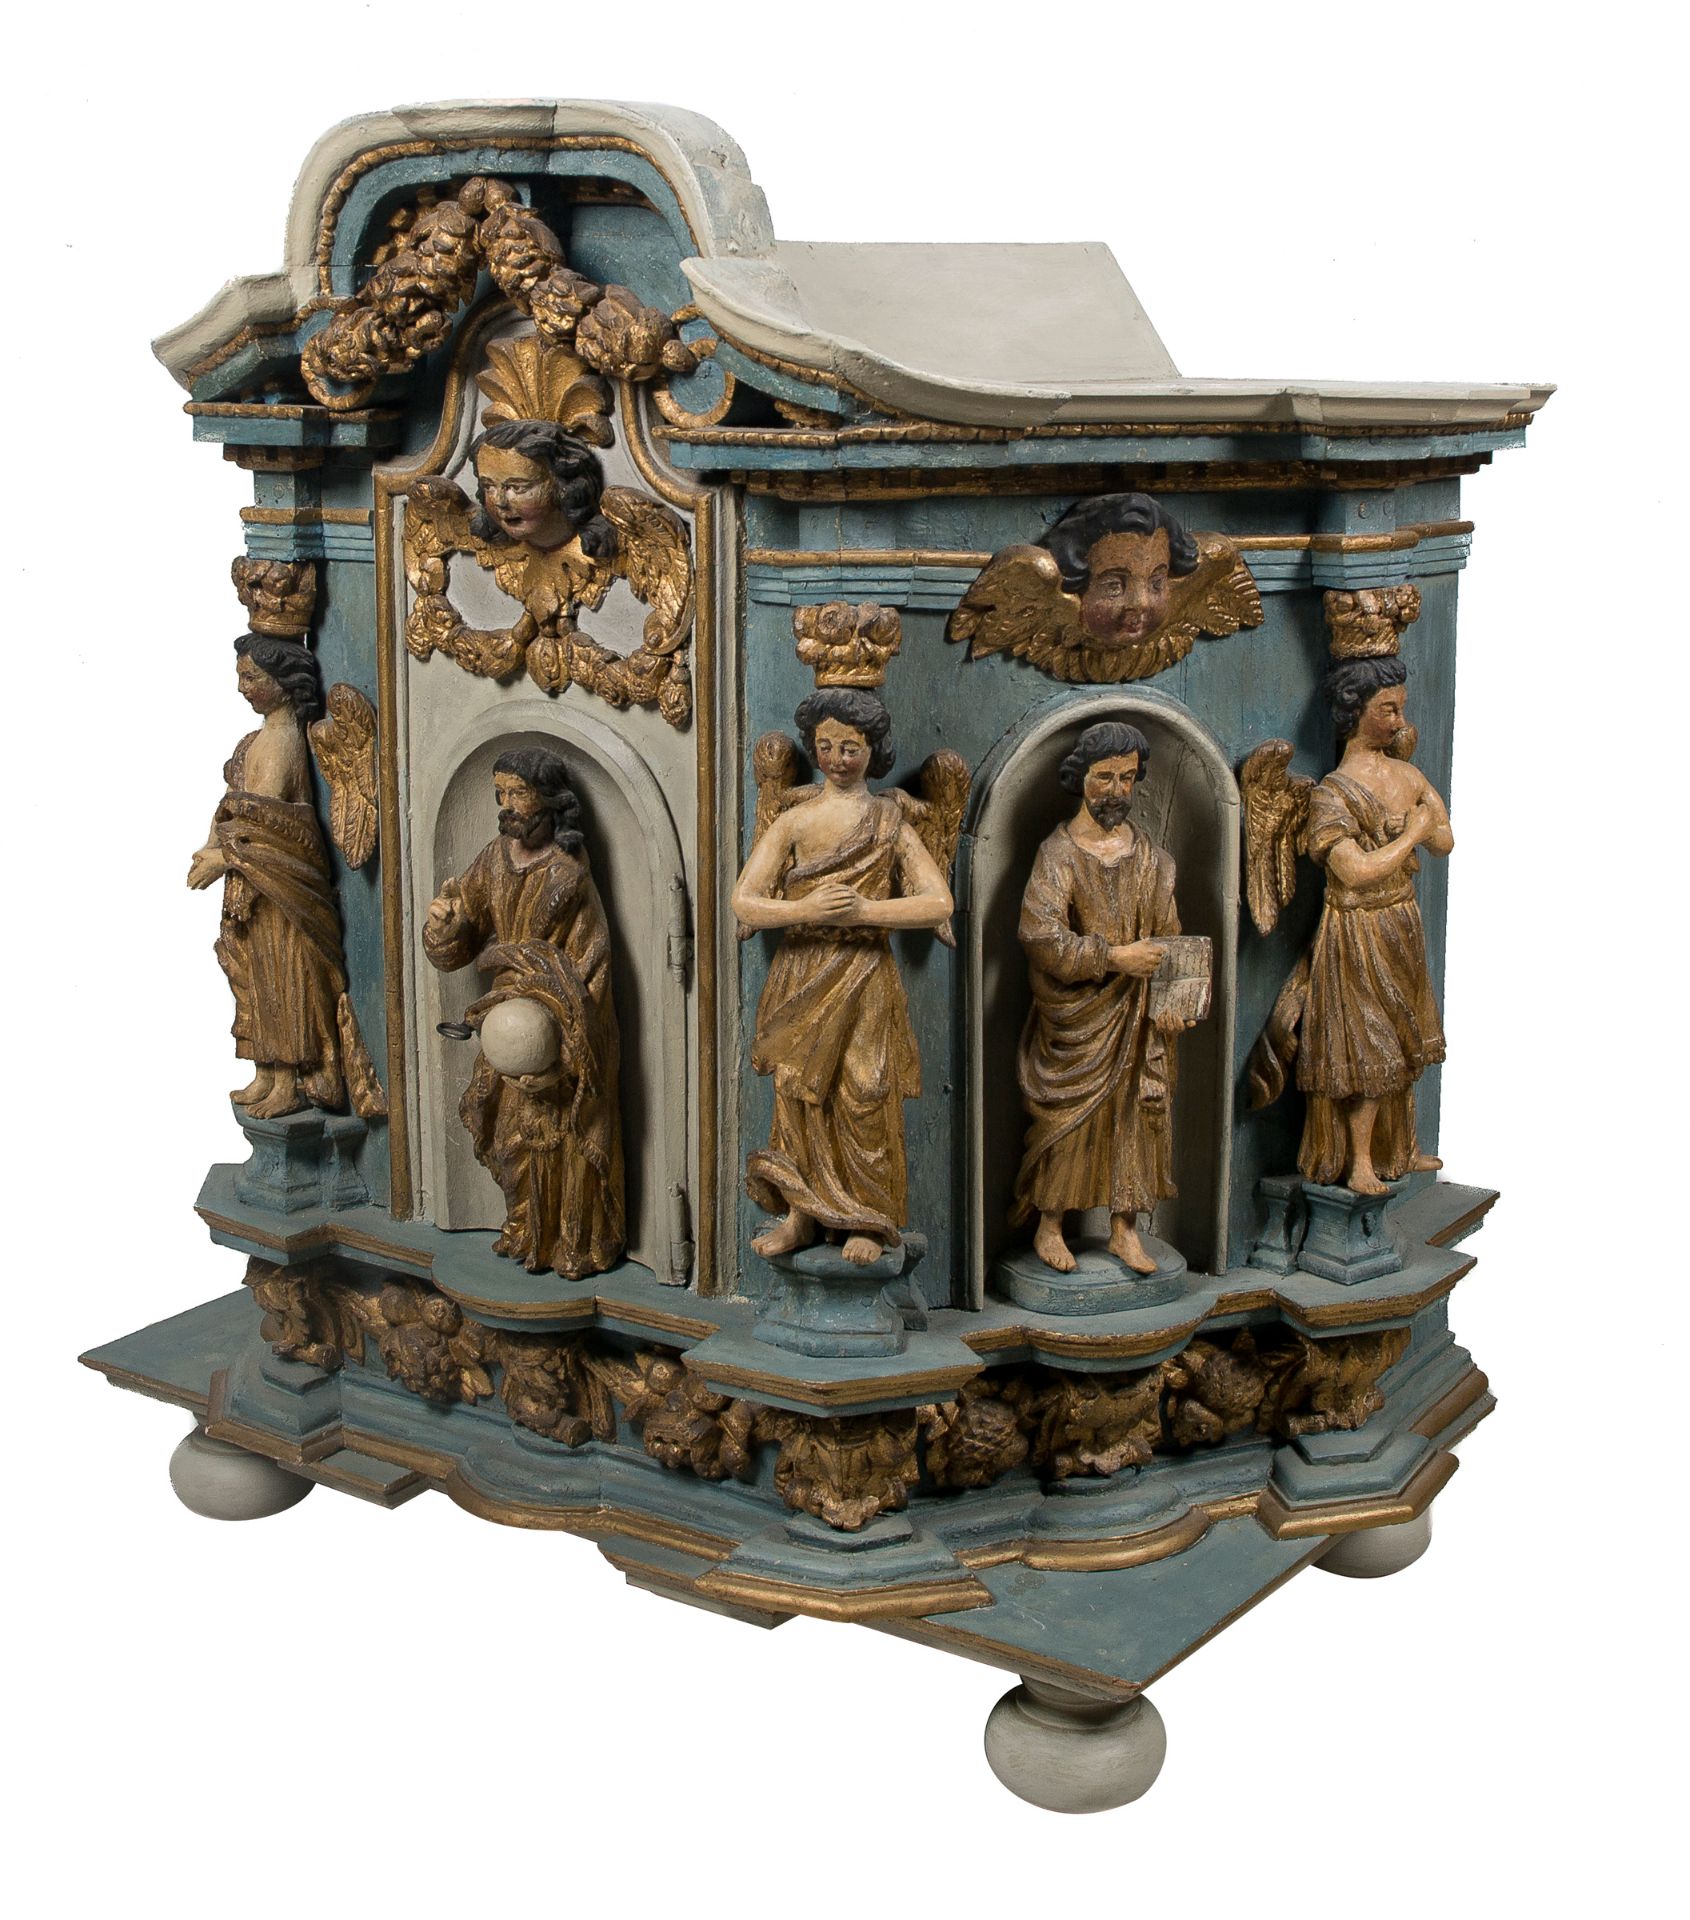 Carved, gilded and polychromed wooden tabernacle. Baroque. 17th century. - Image 3 of 5